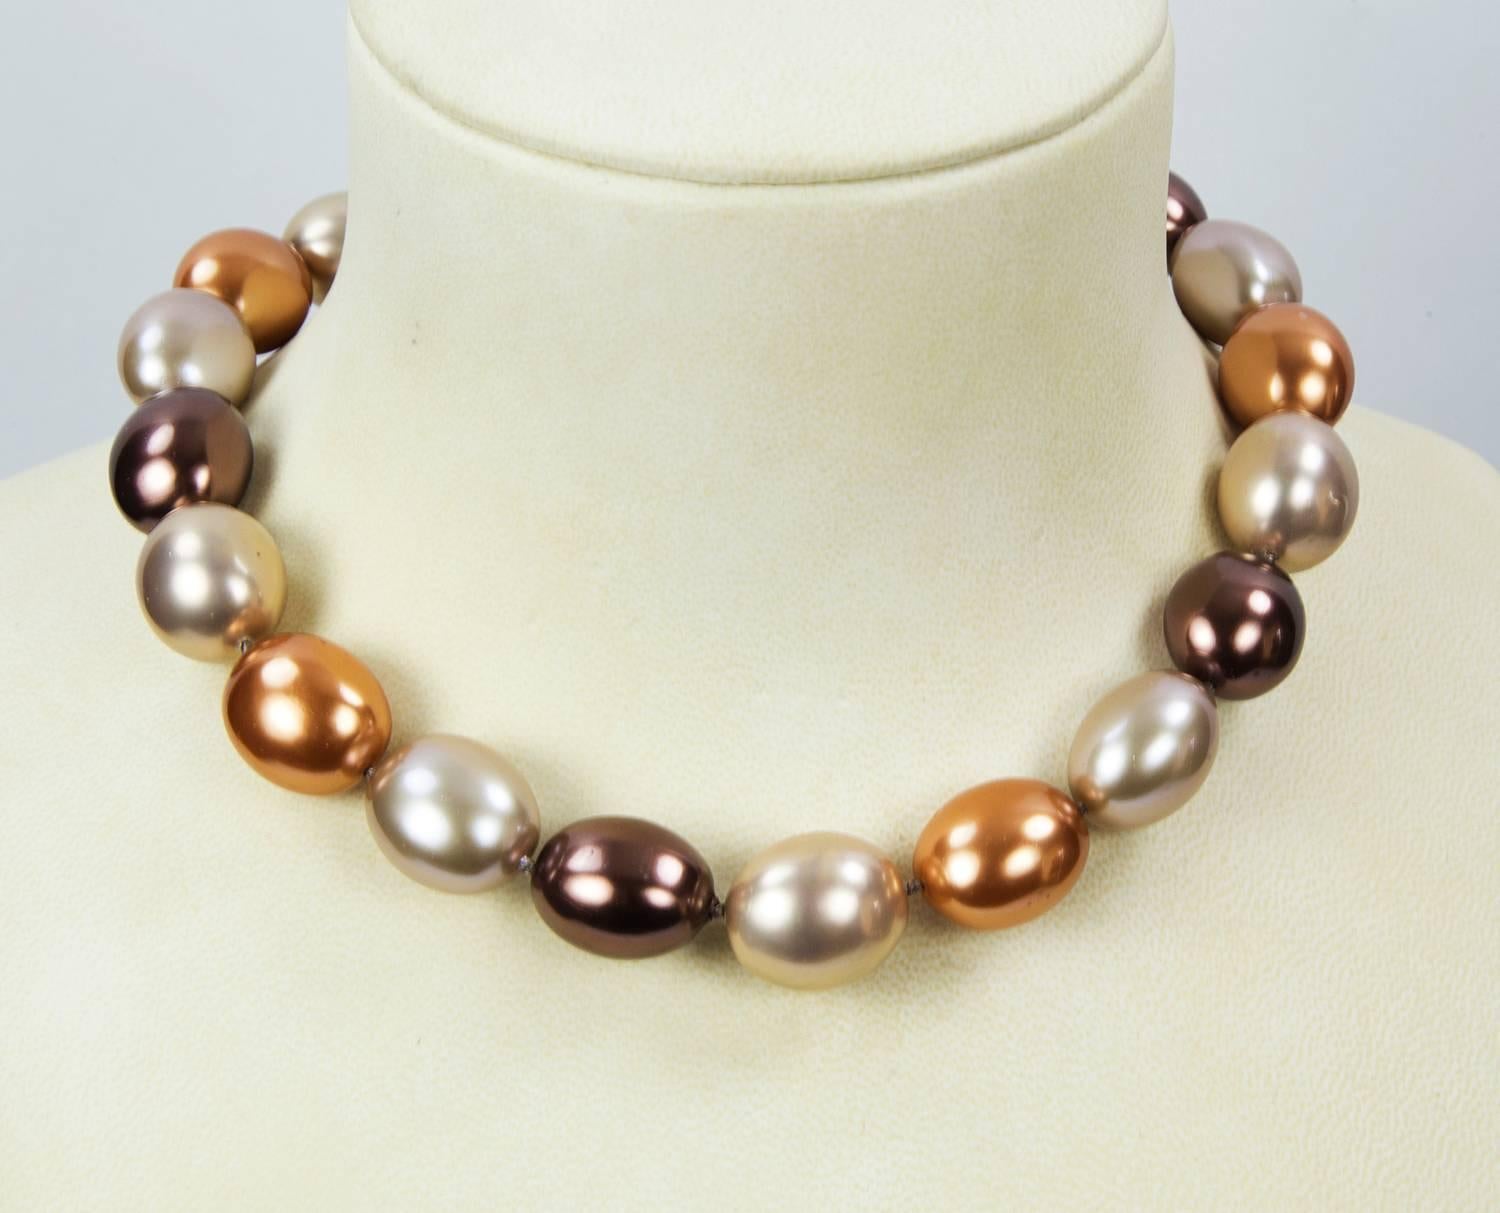 Best quality of faux Tahitian South Sea oval Pearls in unique exotic colors and shades; hand strung and knotted with matching colored silk!  Strand measures approx. 18